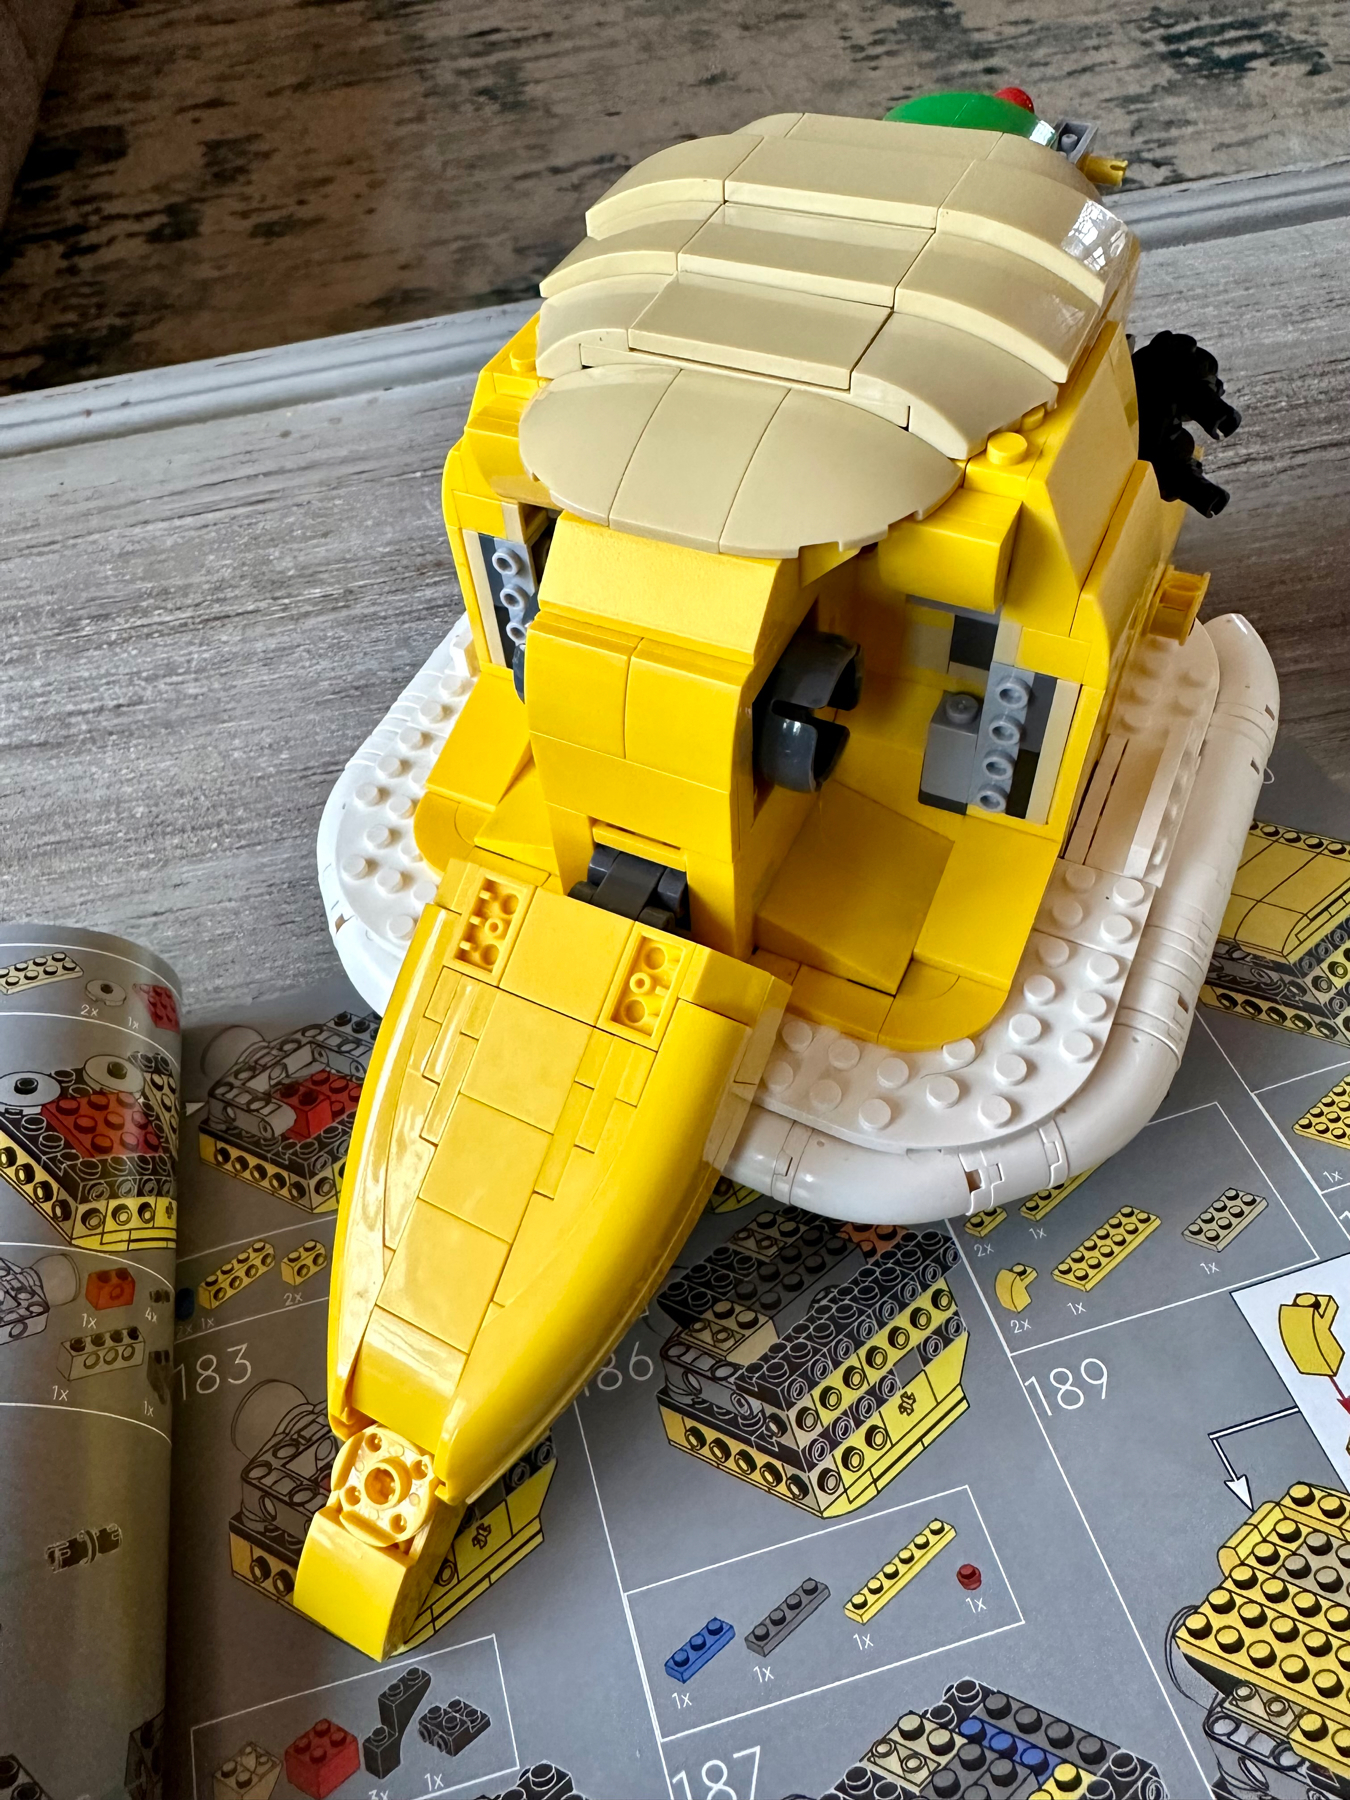 A partially assembled Lego set resembling the head of a lion lays on top of an instruction manual, with bricks in yellow, white, and black colors.